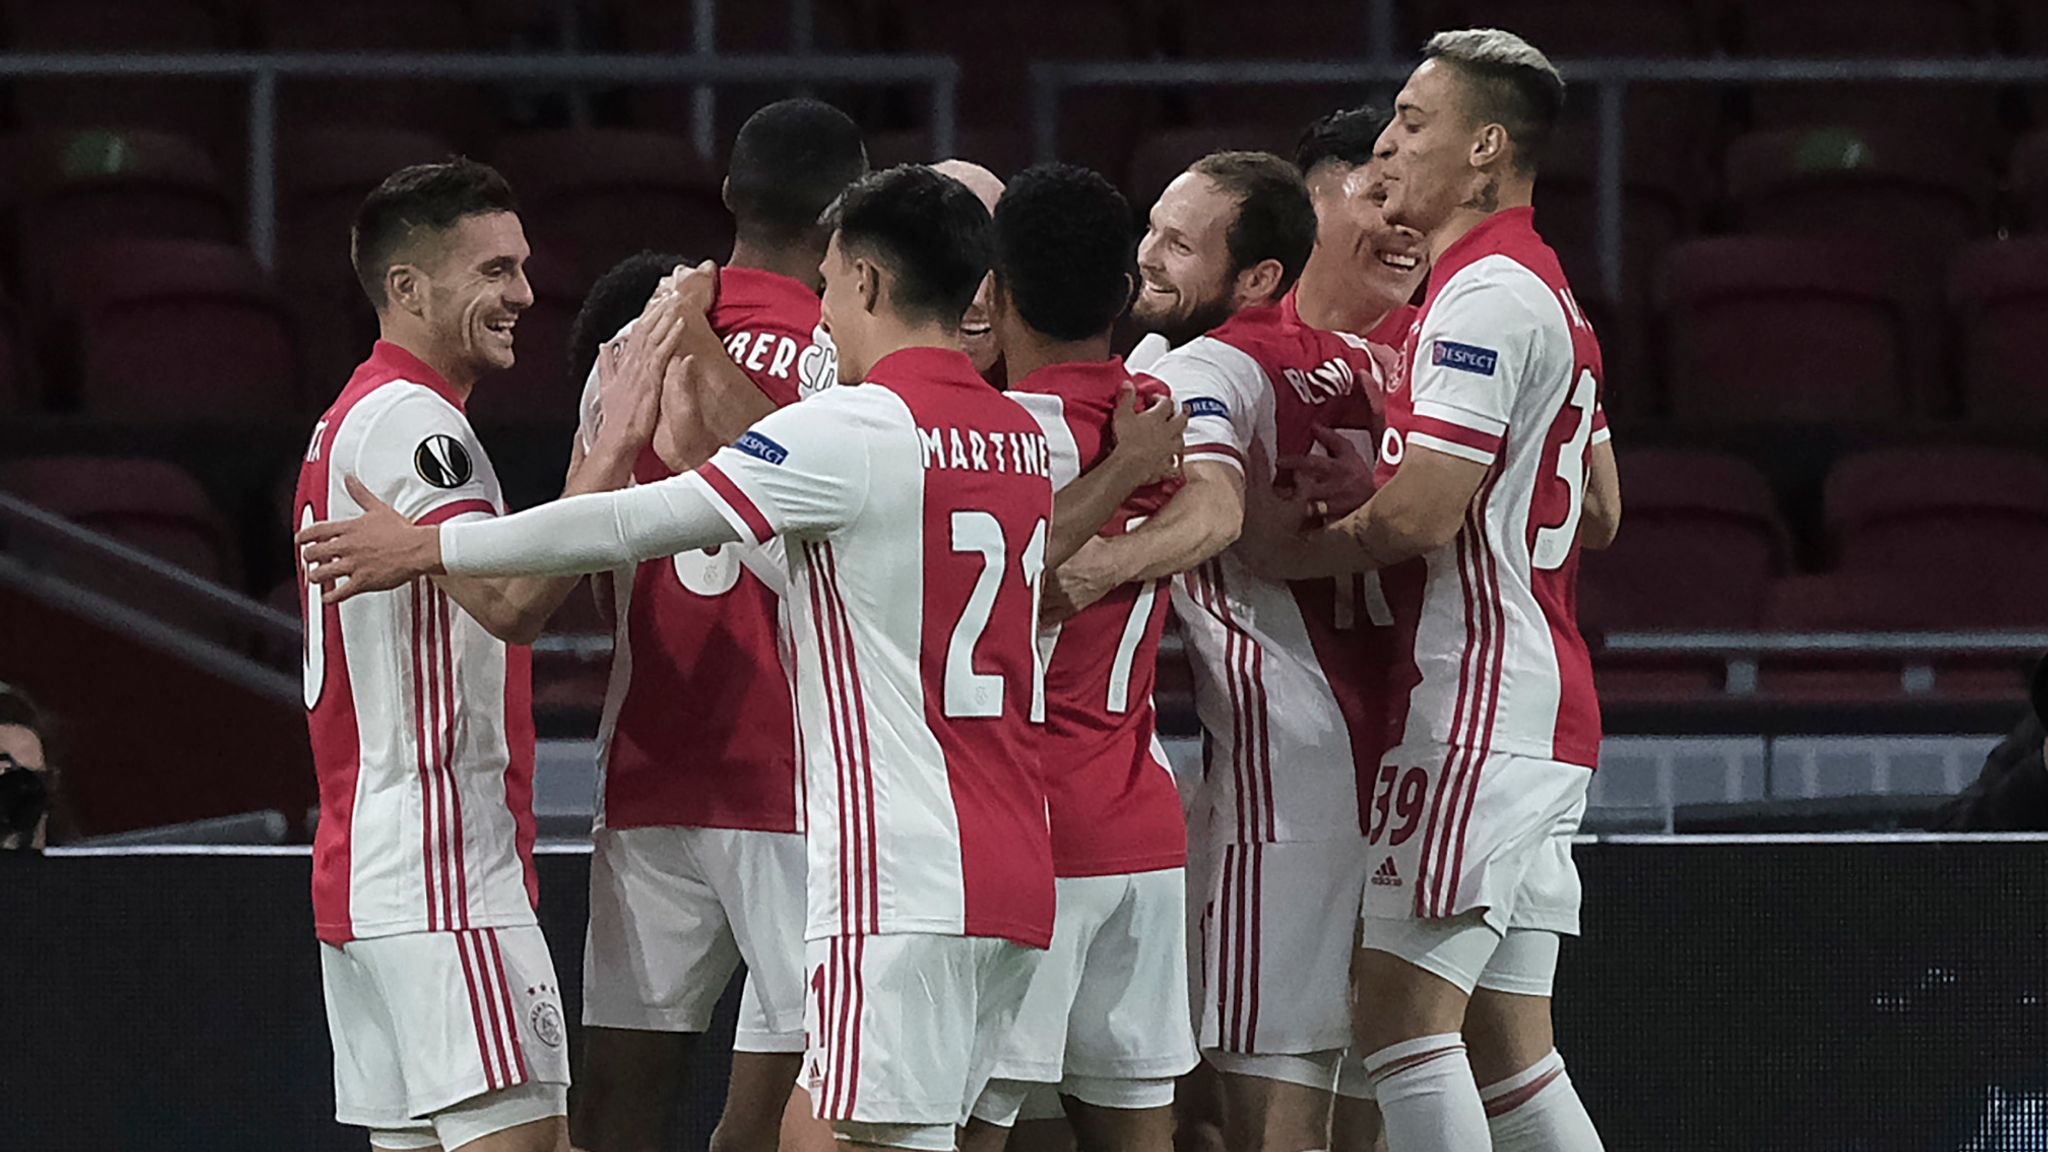 taart Glans hybride Eredivisie: Belgian clubs vote in favour of cross-border league with teams  from the Netherlands | Football News | Sky Sports